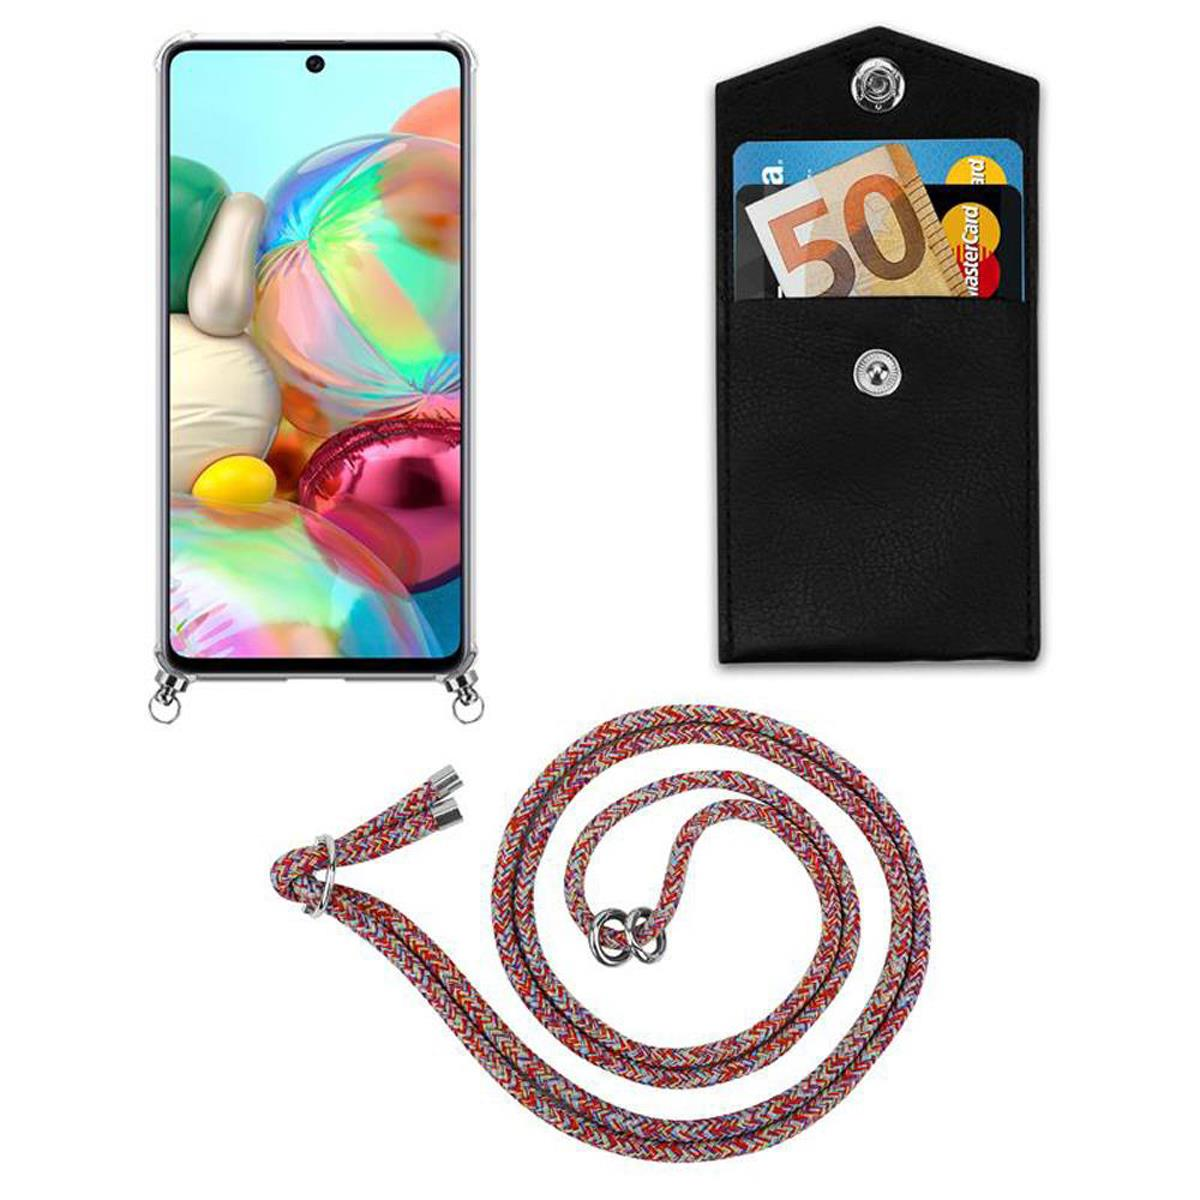 CADORABO Handy Backcover, und Band A51 Samsung, mit Kette Silber Ringen, 5G, Kordel abnehmbarer Galaxy COLORFUL Hülle, PARROT